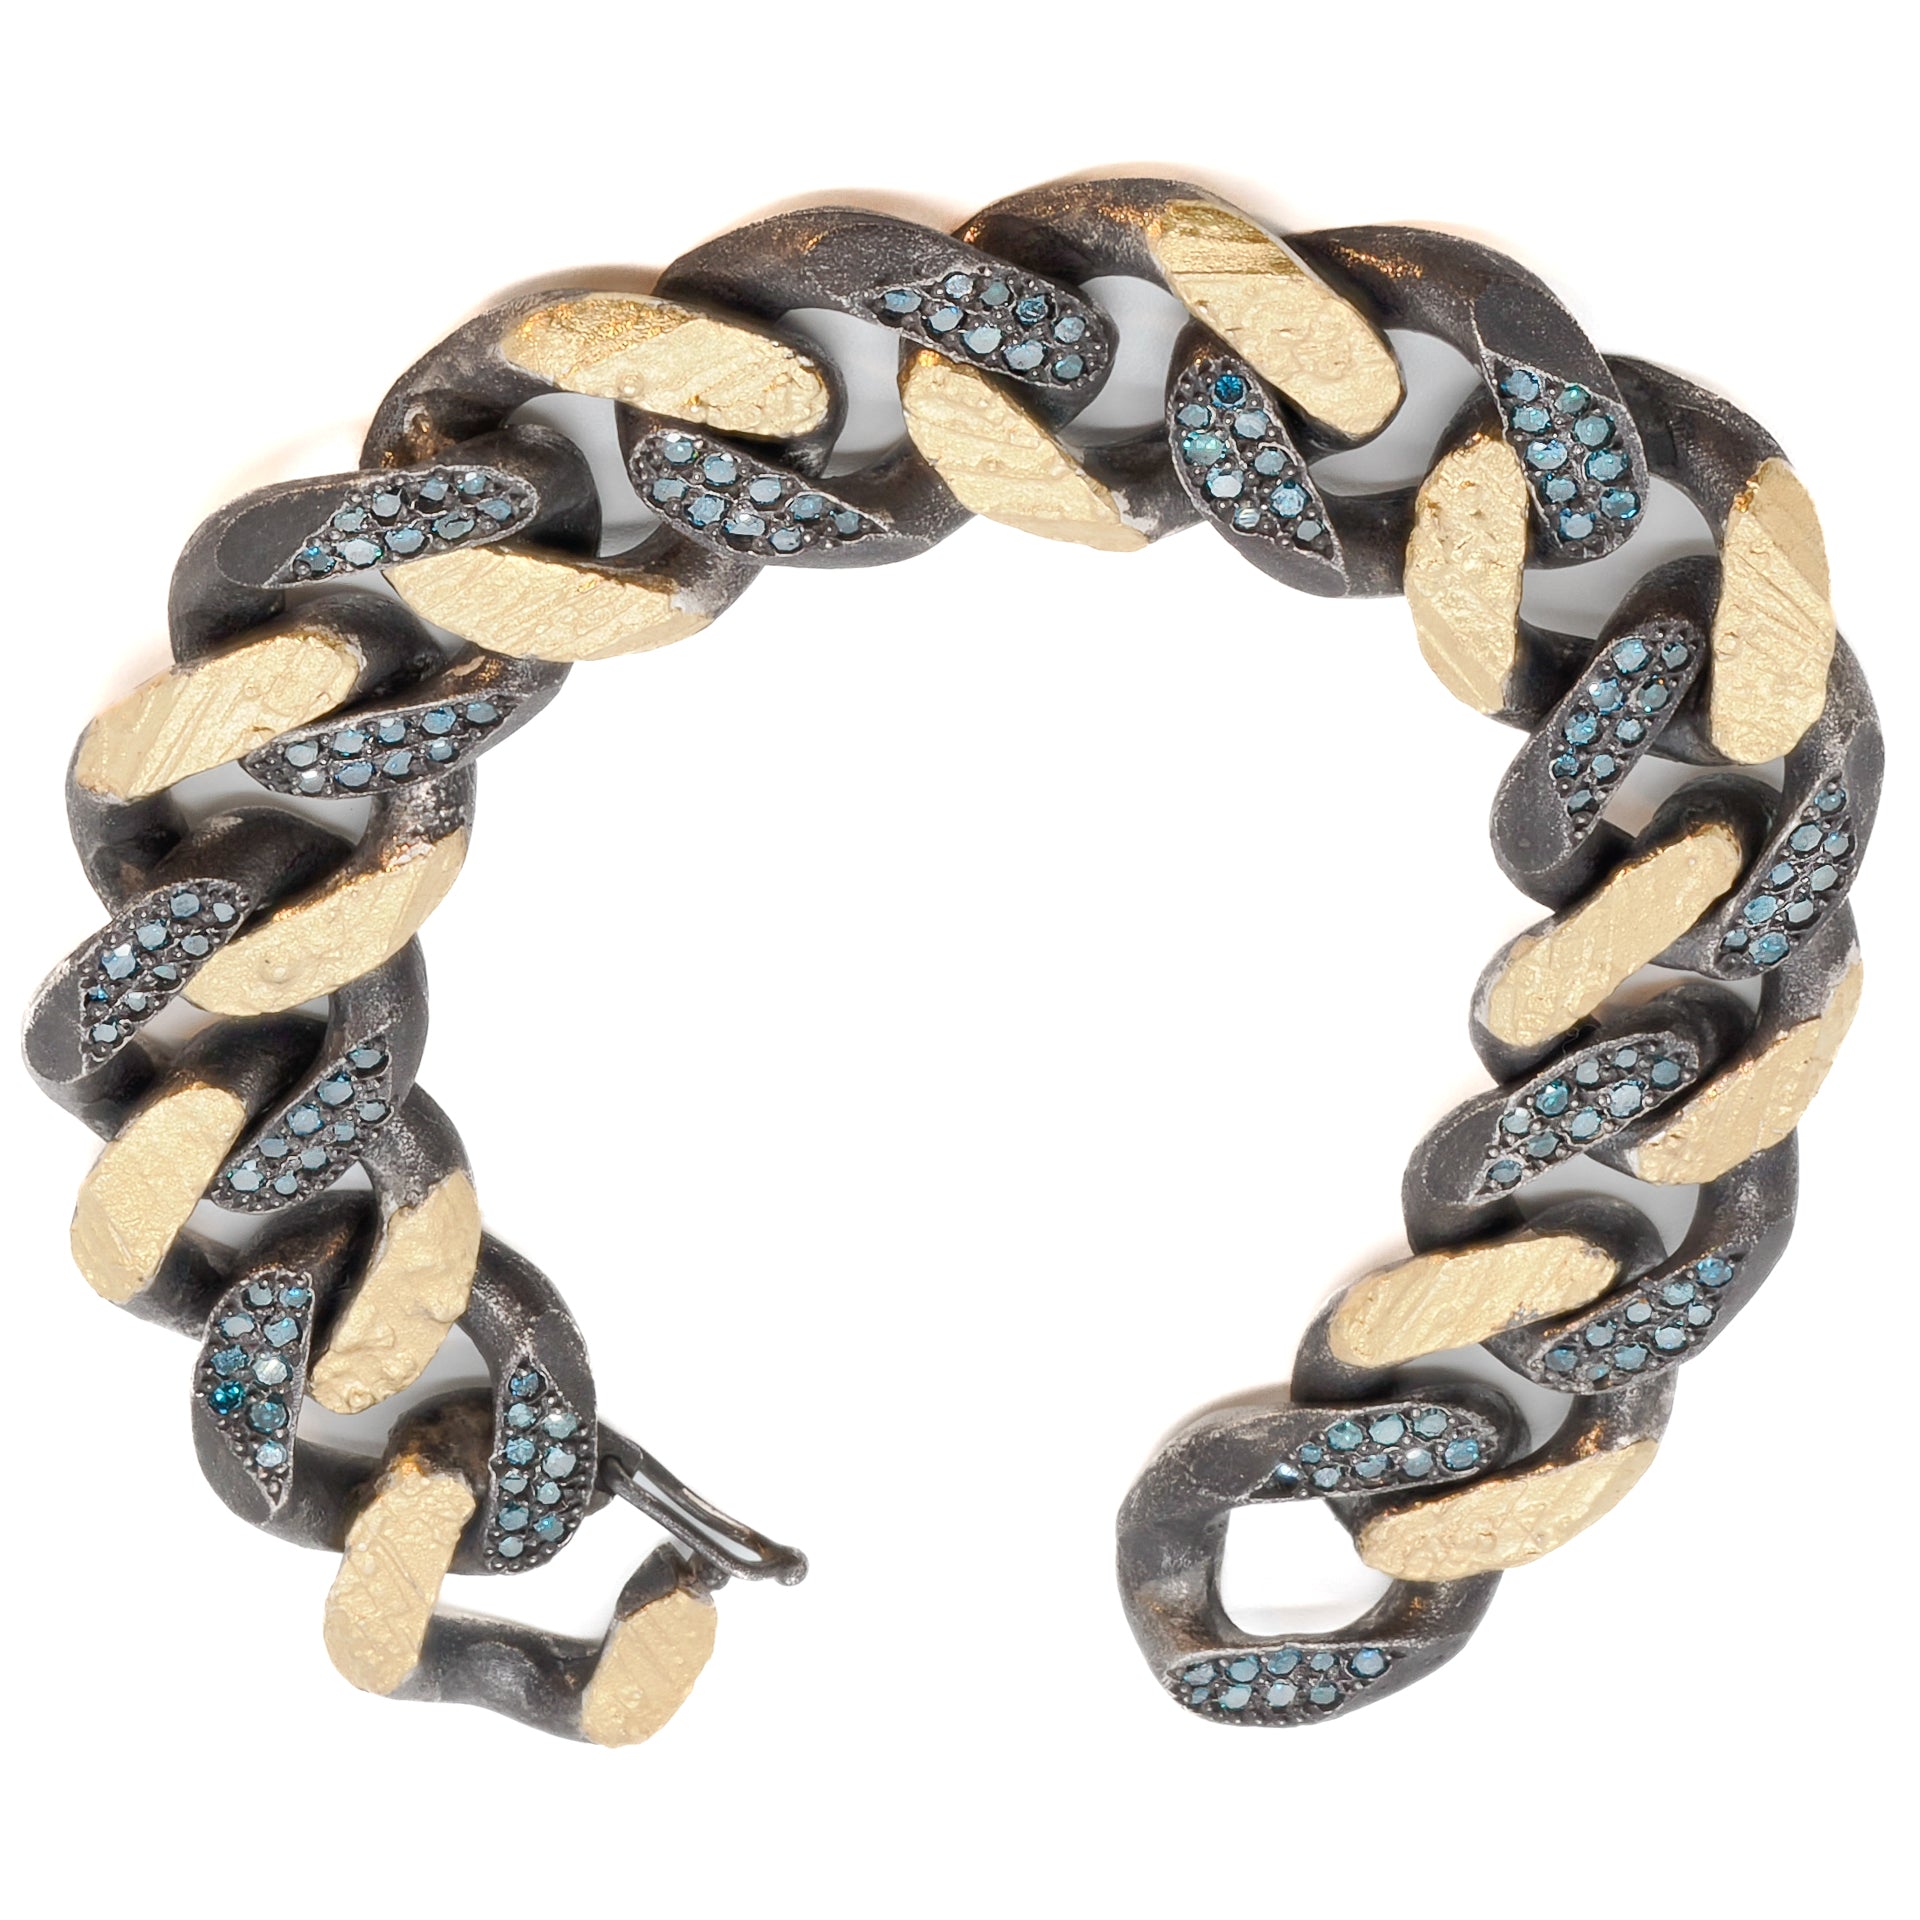 Nature Cuban Petroleum Bracelet, a statement piece of handmade jewelry that combines recycled materials with the brilliance of high-quality diamonds.